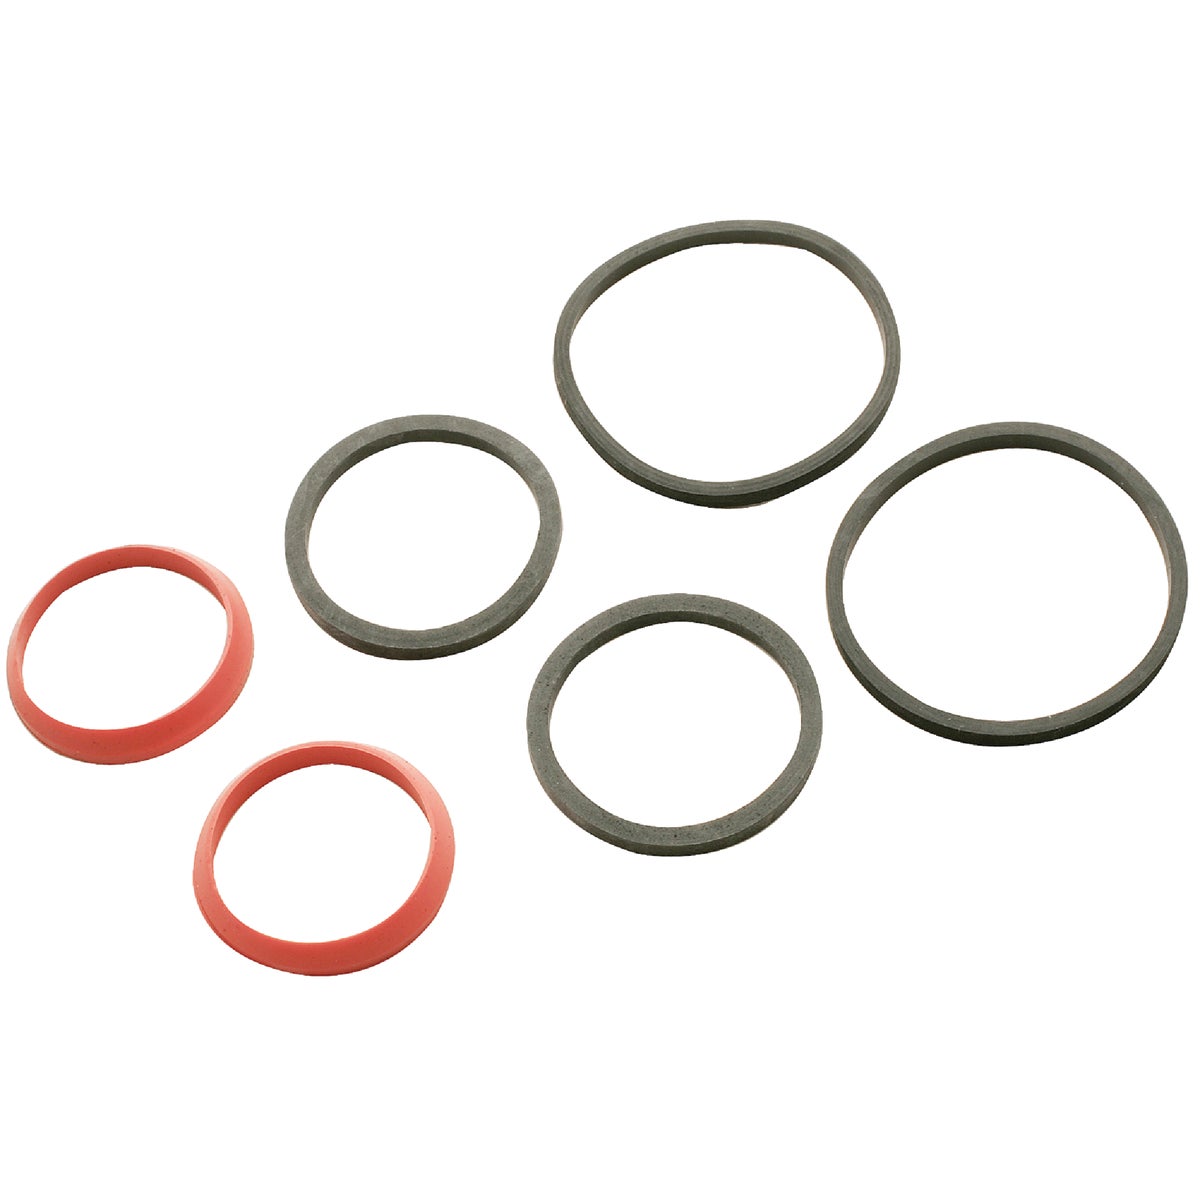 Item 443906, Assorted slip-joint washers, 2 each 1-1/4", 1-1/2", and 2